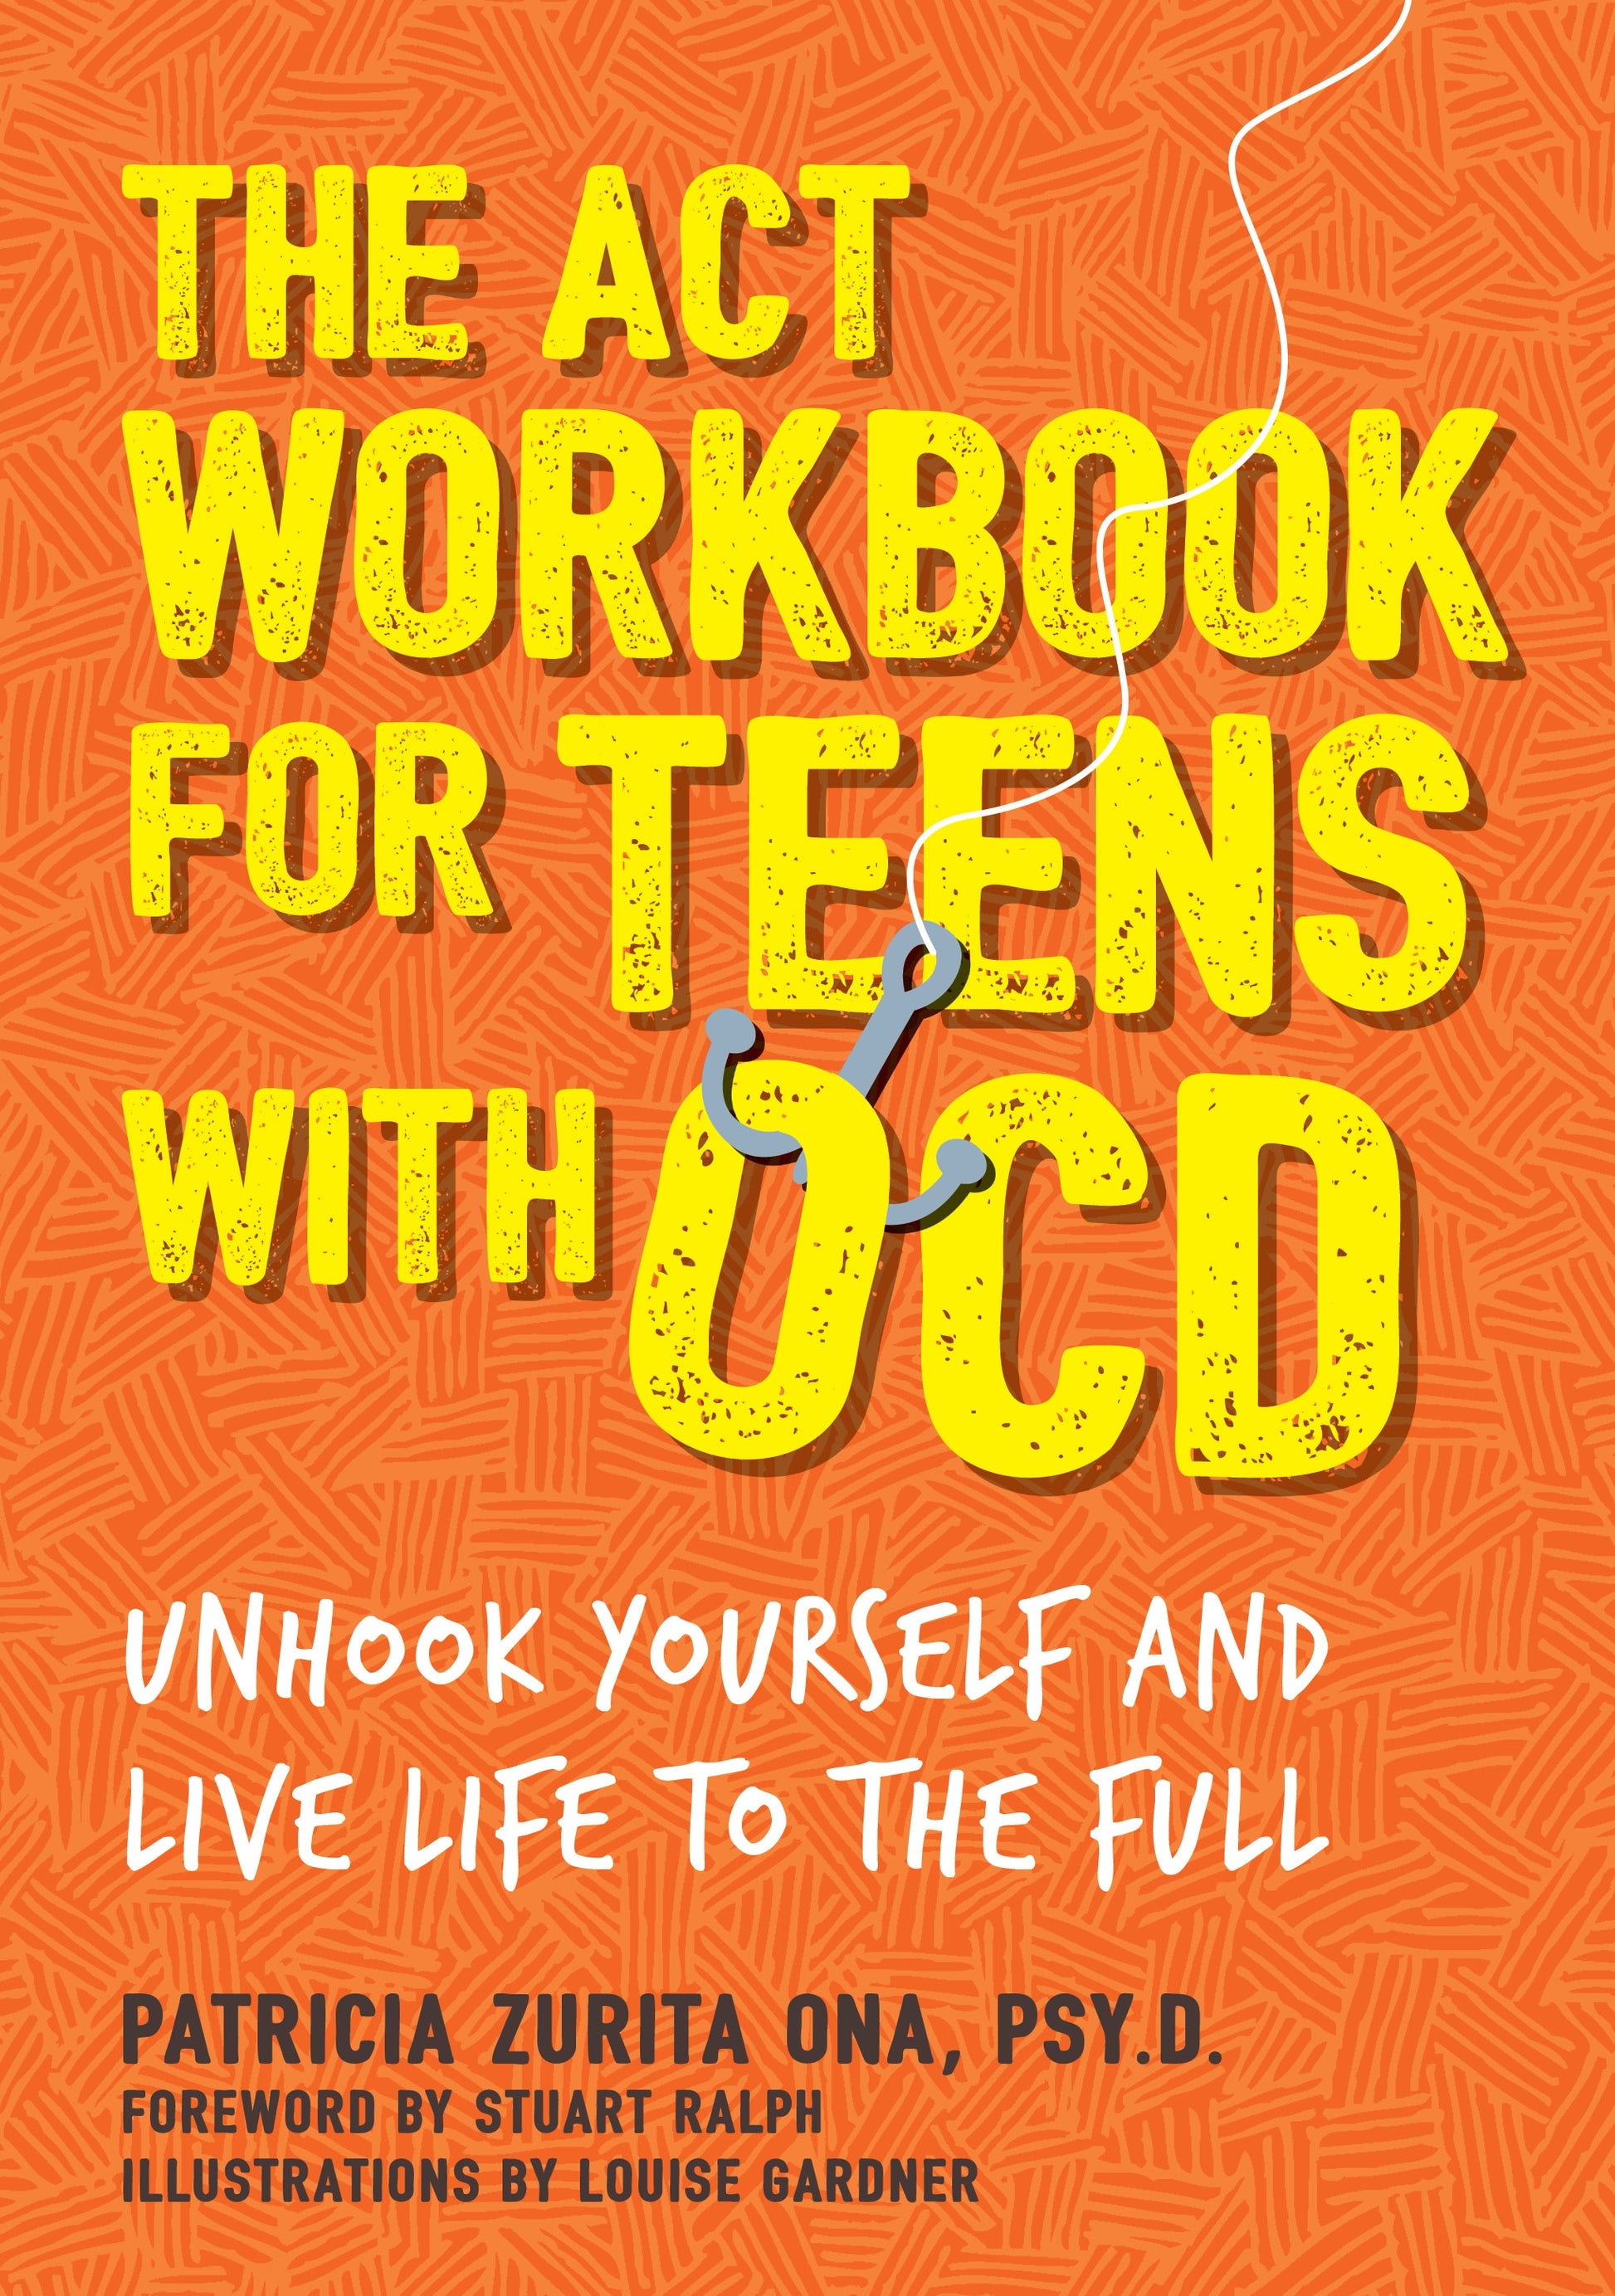 The ACT Workbook for Teens with OCD by Louise Gardner, Stuart Ralph, Patricia Zurita Ona, Psy.D